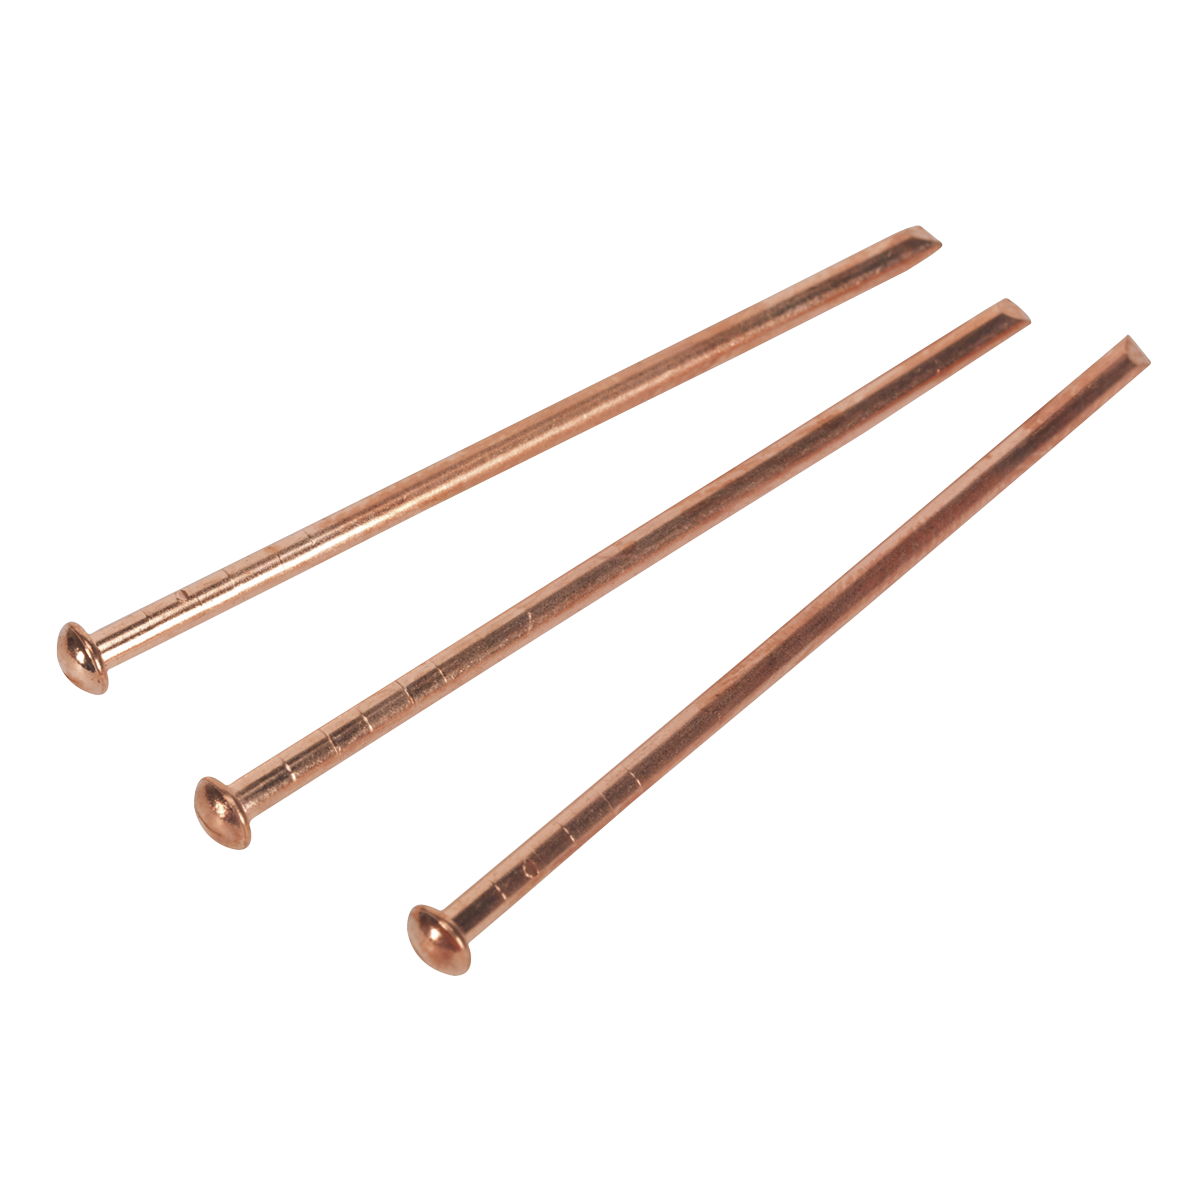 Stud Welding Nail 2 x 50mm - Pack of 200 - PS/000350/200 - Farming Parts